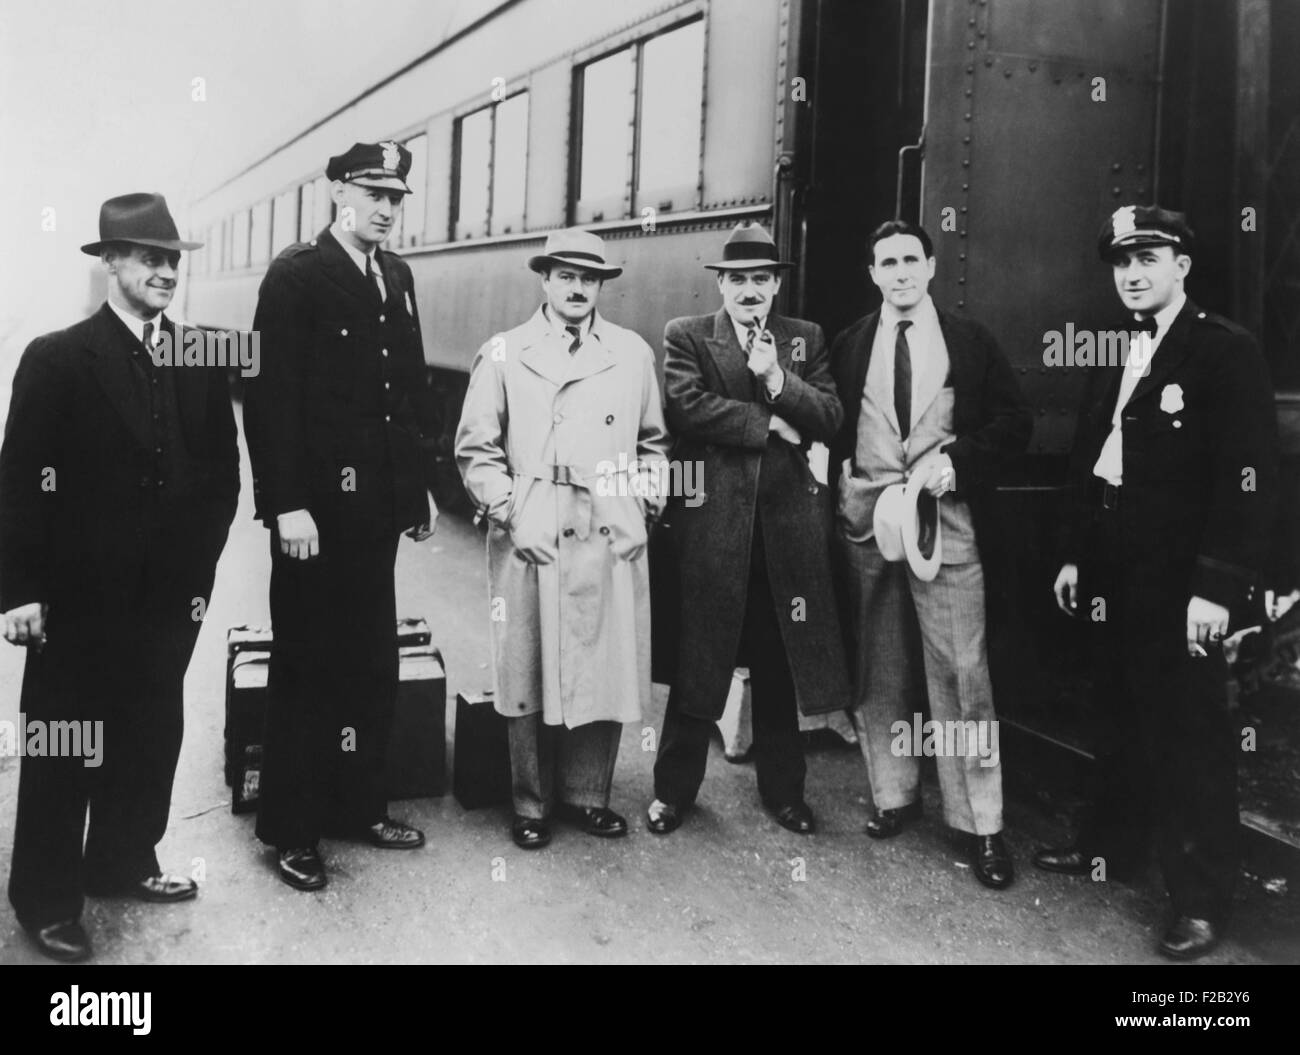 Earl Browder, Communist candidate for President, was arrested as he arrived in Terre Haute, Indiana. Sept. 30, 1936. Browder and four companions were held on vagrancy charges. L-R: H. A. Collins, Sec.Vigo County Law and Order League; unidentified policeman; Waldo Frank, New York novelist; Earl Browder; Seymour Waldman, of New York; unidentified policeman. (CSU 2015 8 468) Stock Photo